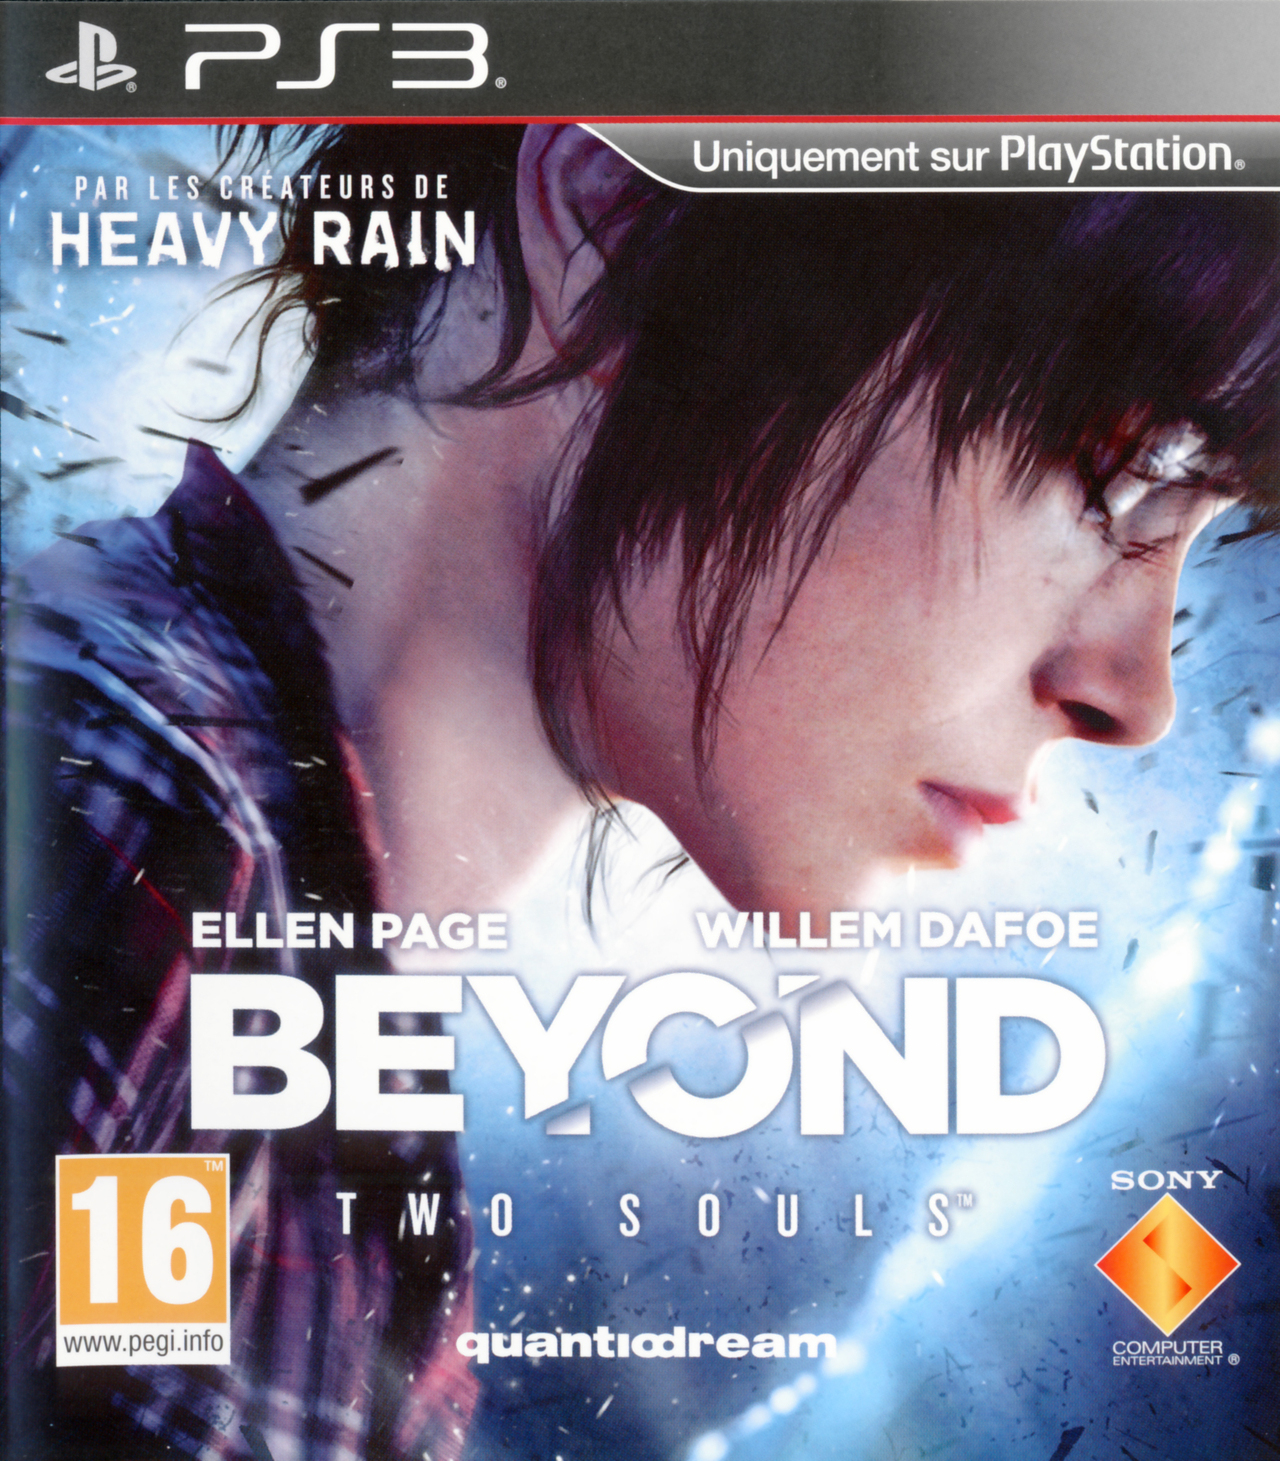 http://gamingway.fr/wp-content/uploads/2013/11/beyond-two-souls-playstation-3-ps3-jaquette.jpg